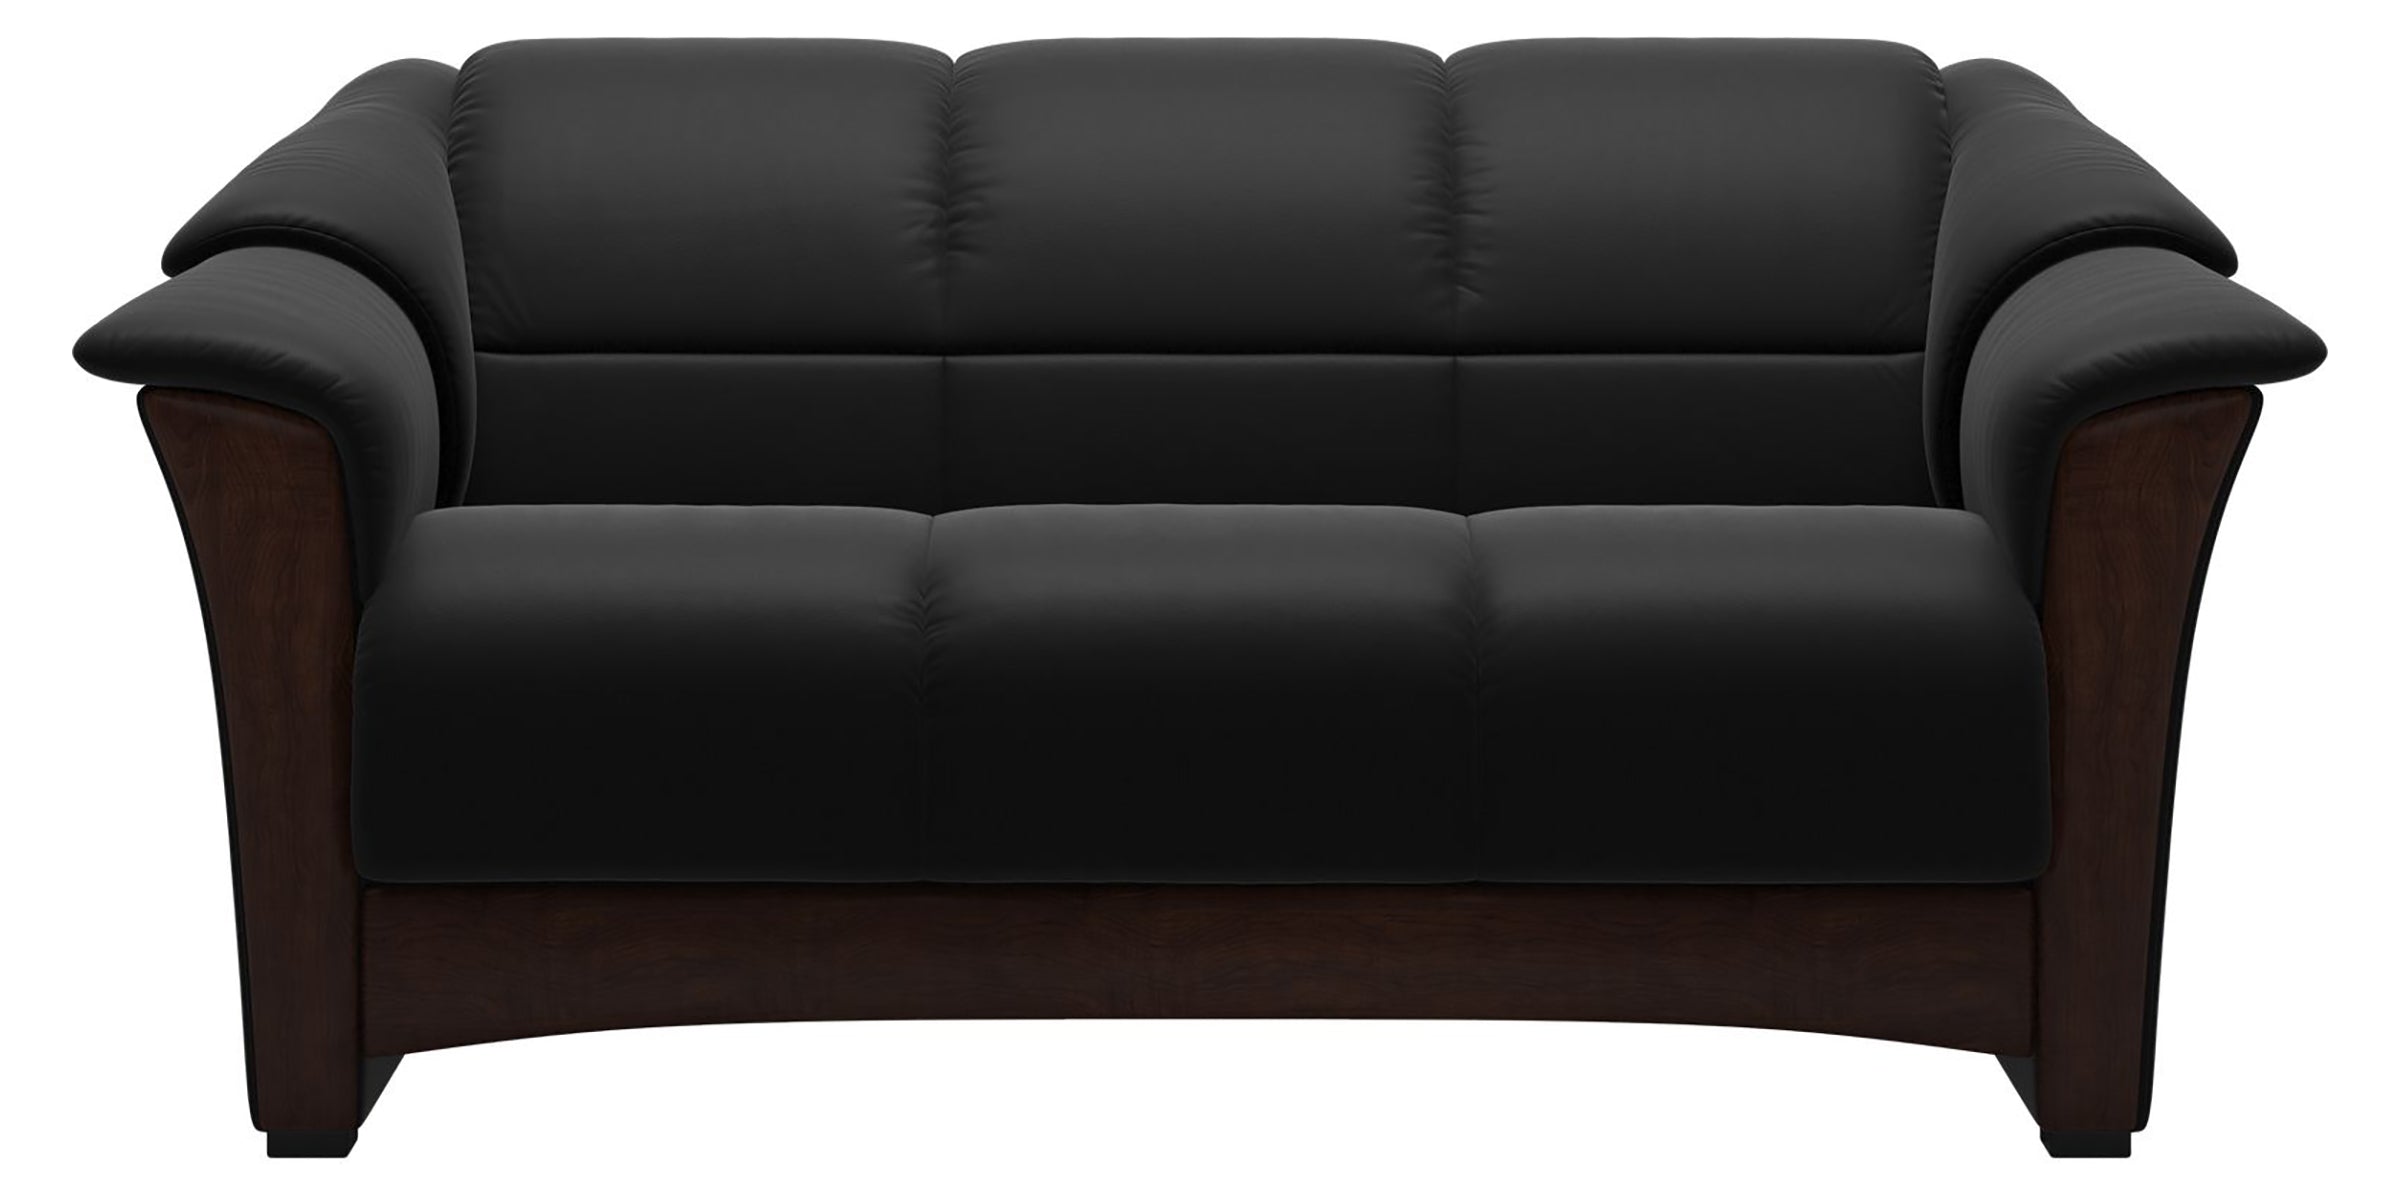 Paloma Leather Black and Brown Base | Stressless Oslo Loveseat | Valley Ridge Furniture